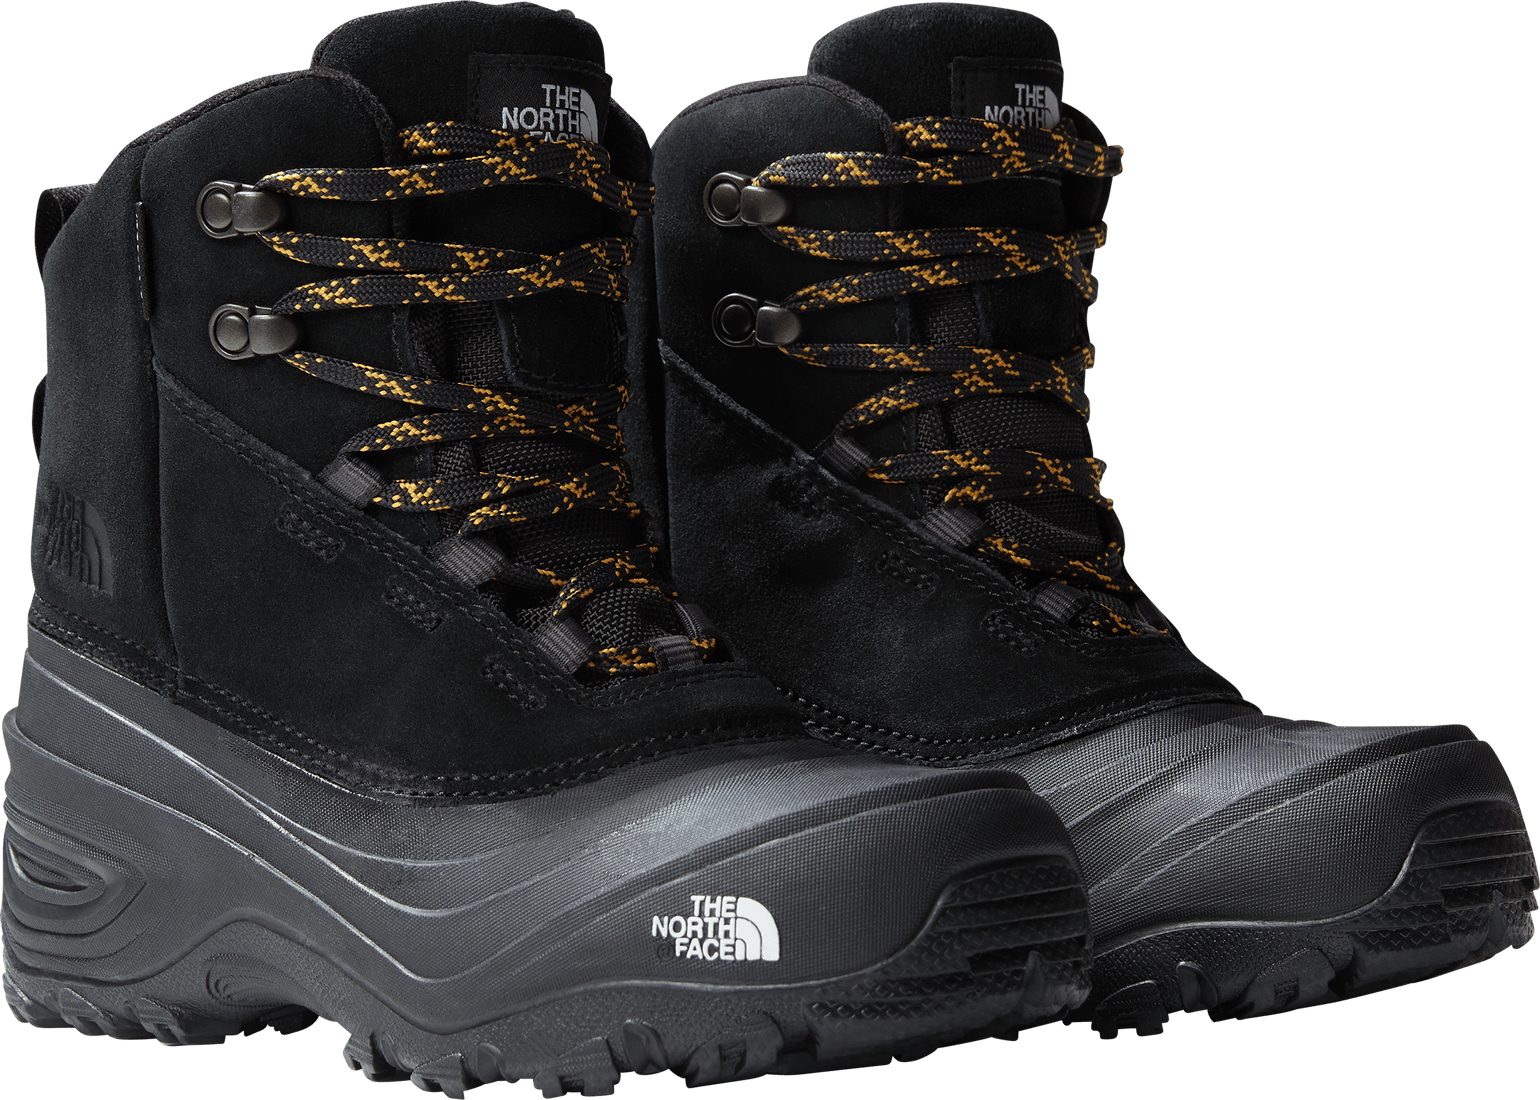 The North Face Kids' Chilkat V Lace Waterproof Hiking Boots TNF Black/TNF Black